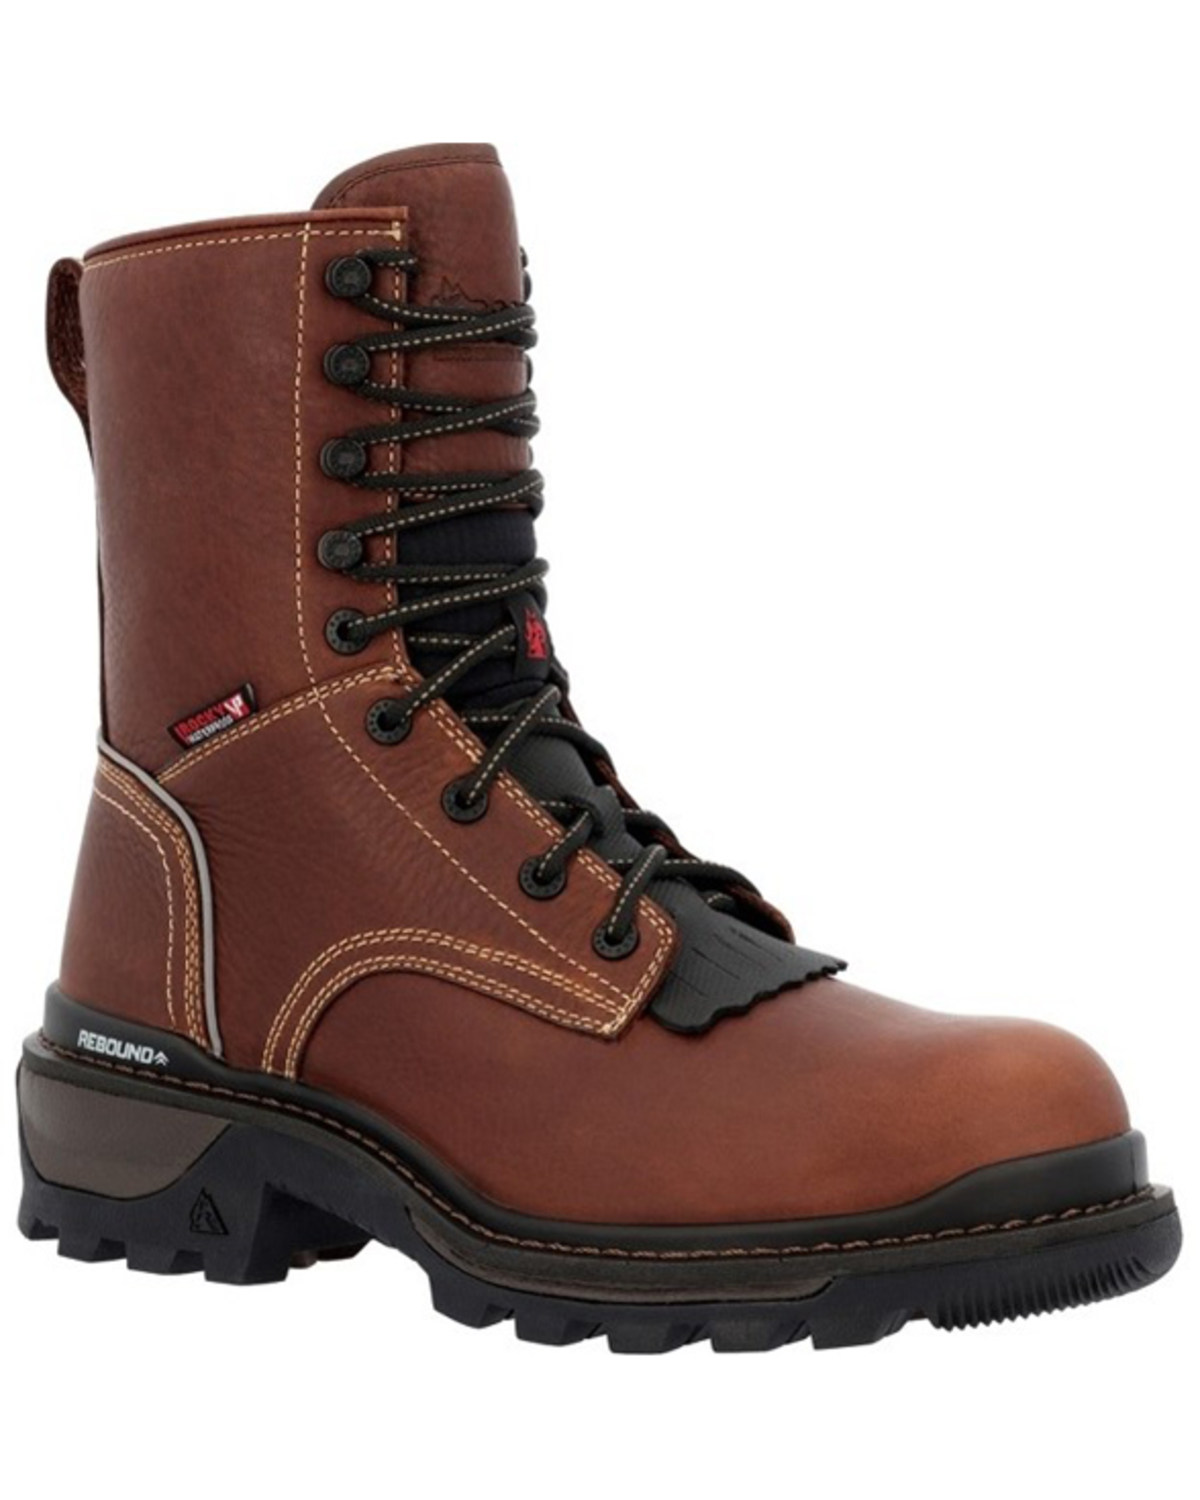 Rocky Men's Rams Horn Waterproof Lace-Up Logger Work Boots - Composite Toe